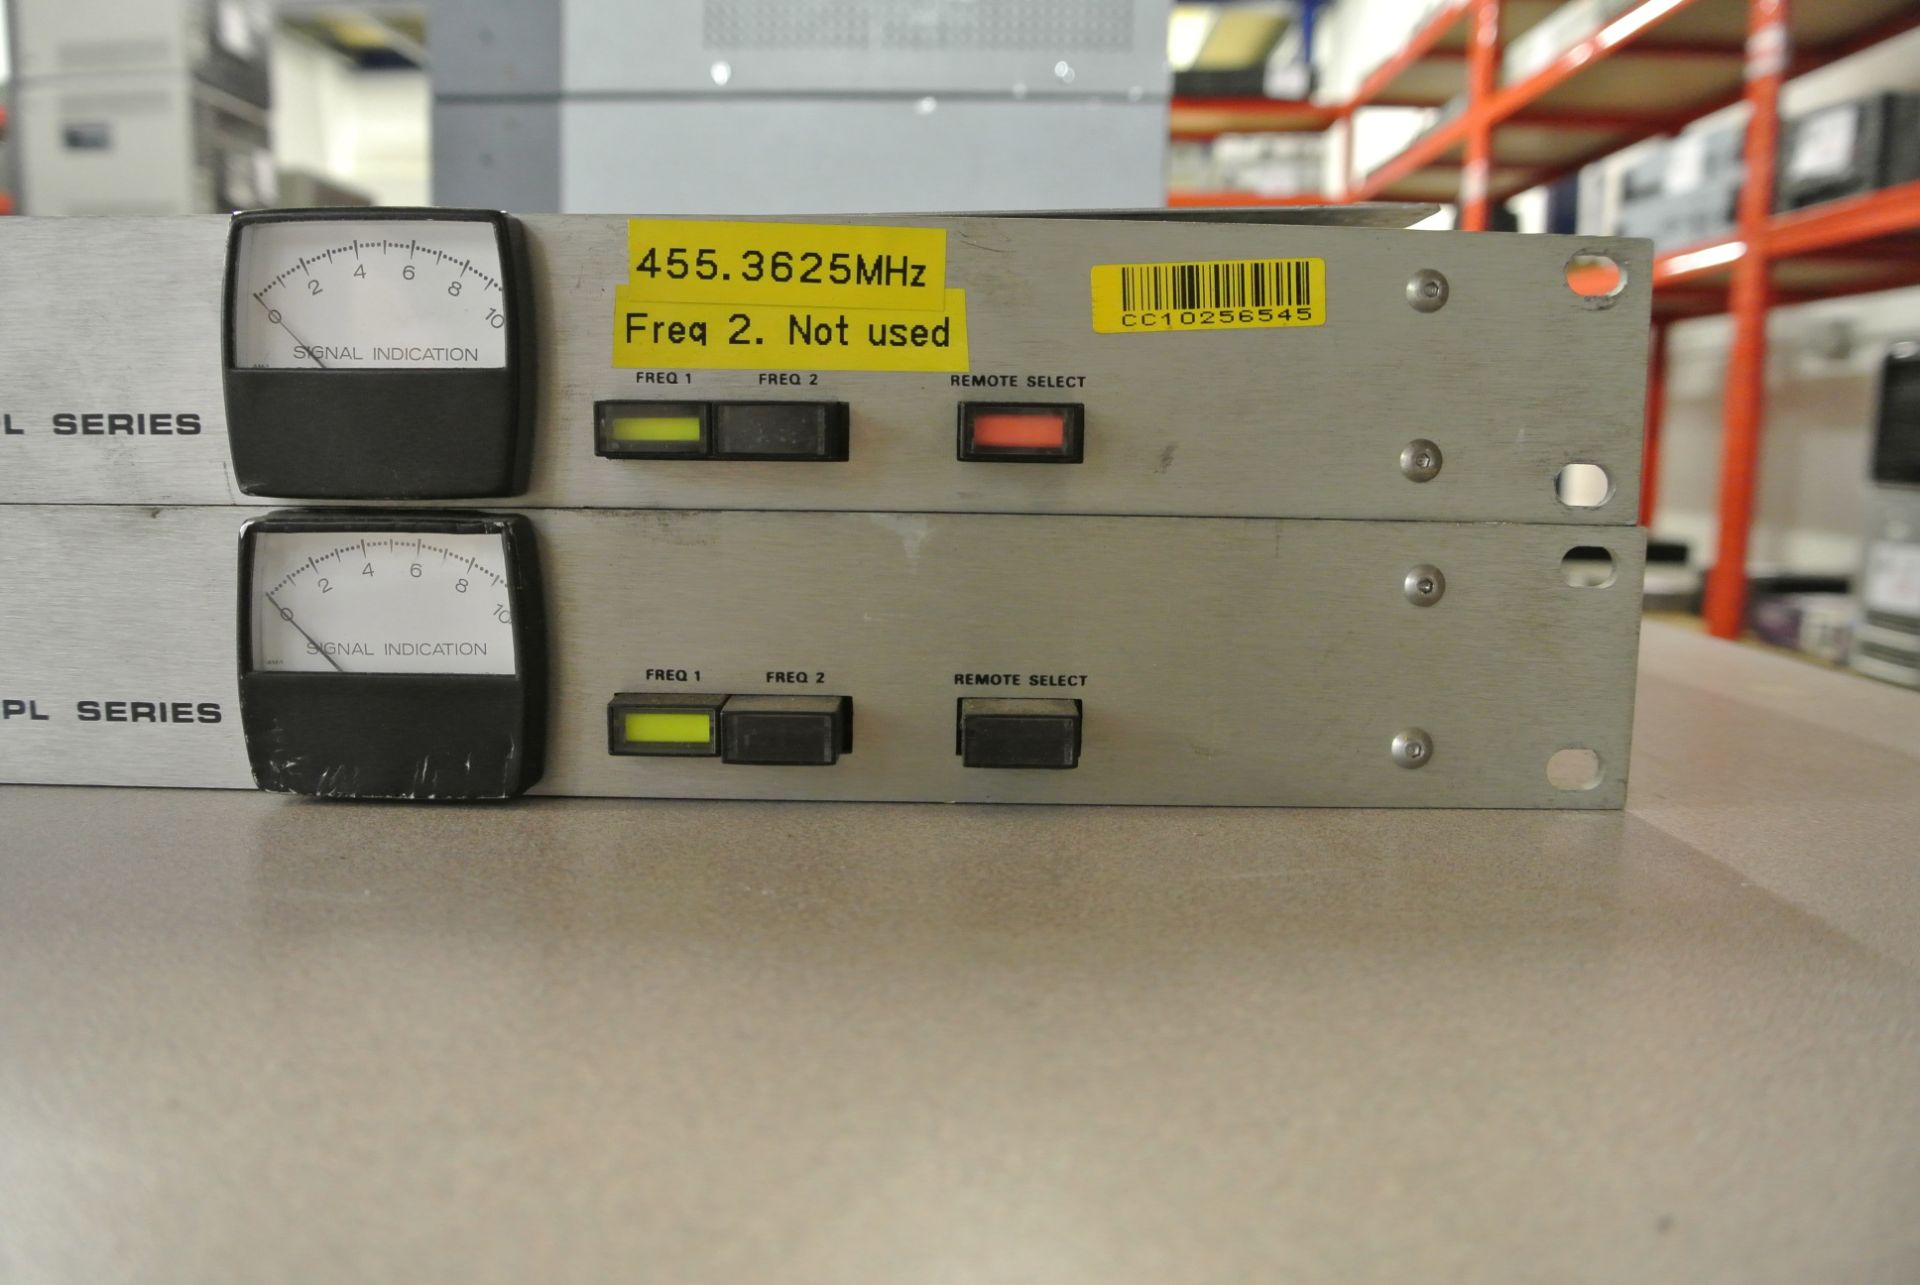 2 x Moseley Associates Inc. Remote Pickup Receiver RPL Series RPL-4C - Vintage Broadcast Receivers - Image 3 of 6